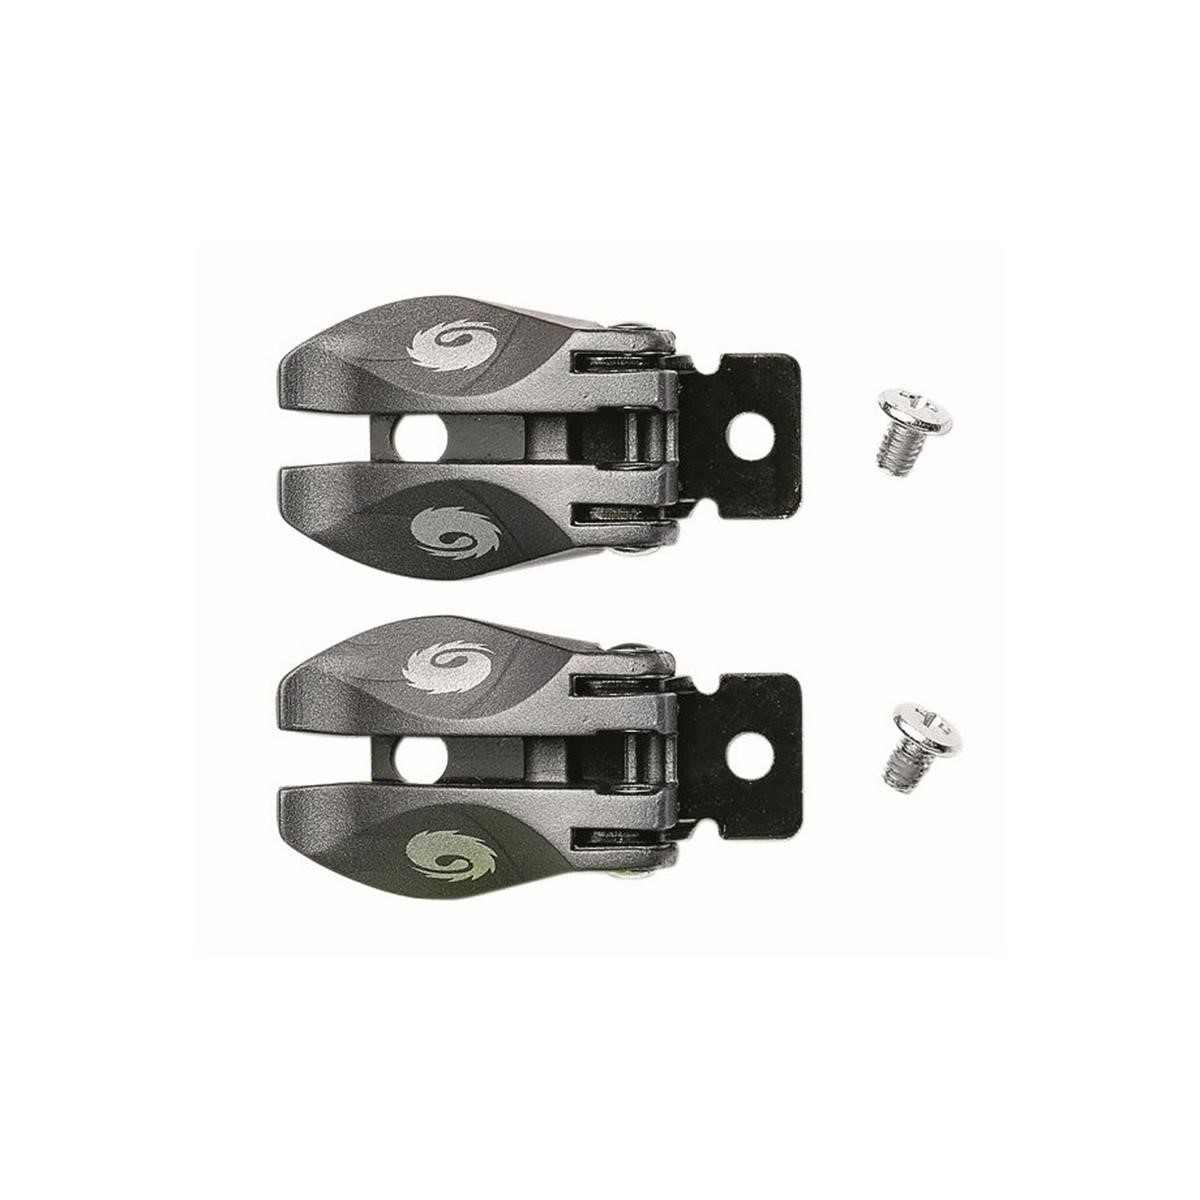 Sidi Replacement Buckle Kit Crossfire / Agueda / Stinger / X-3 / Trial Grey